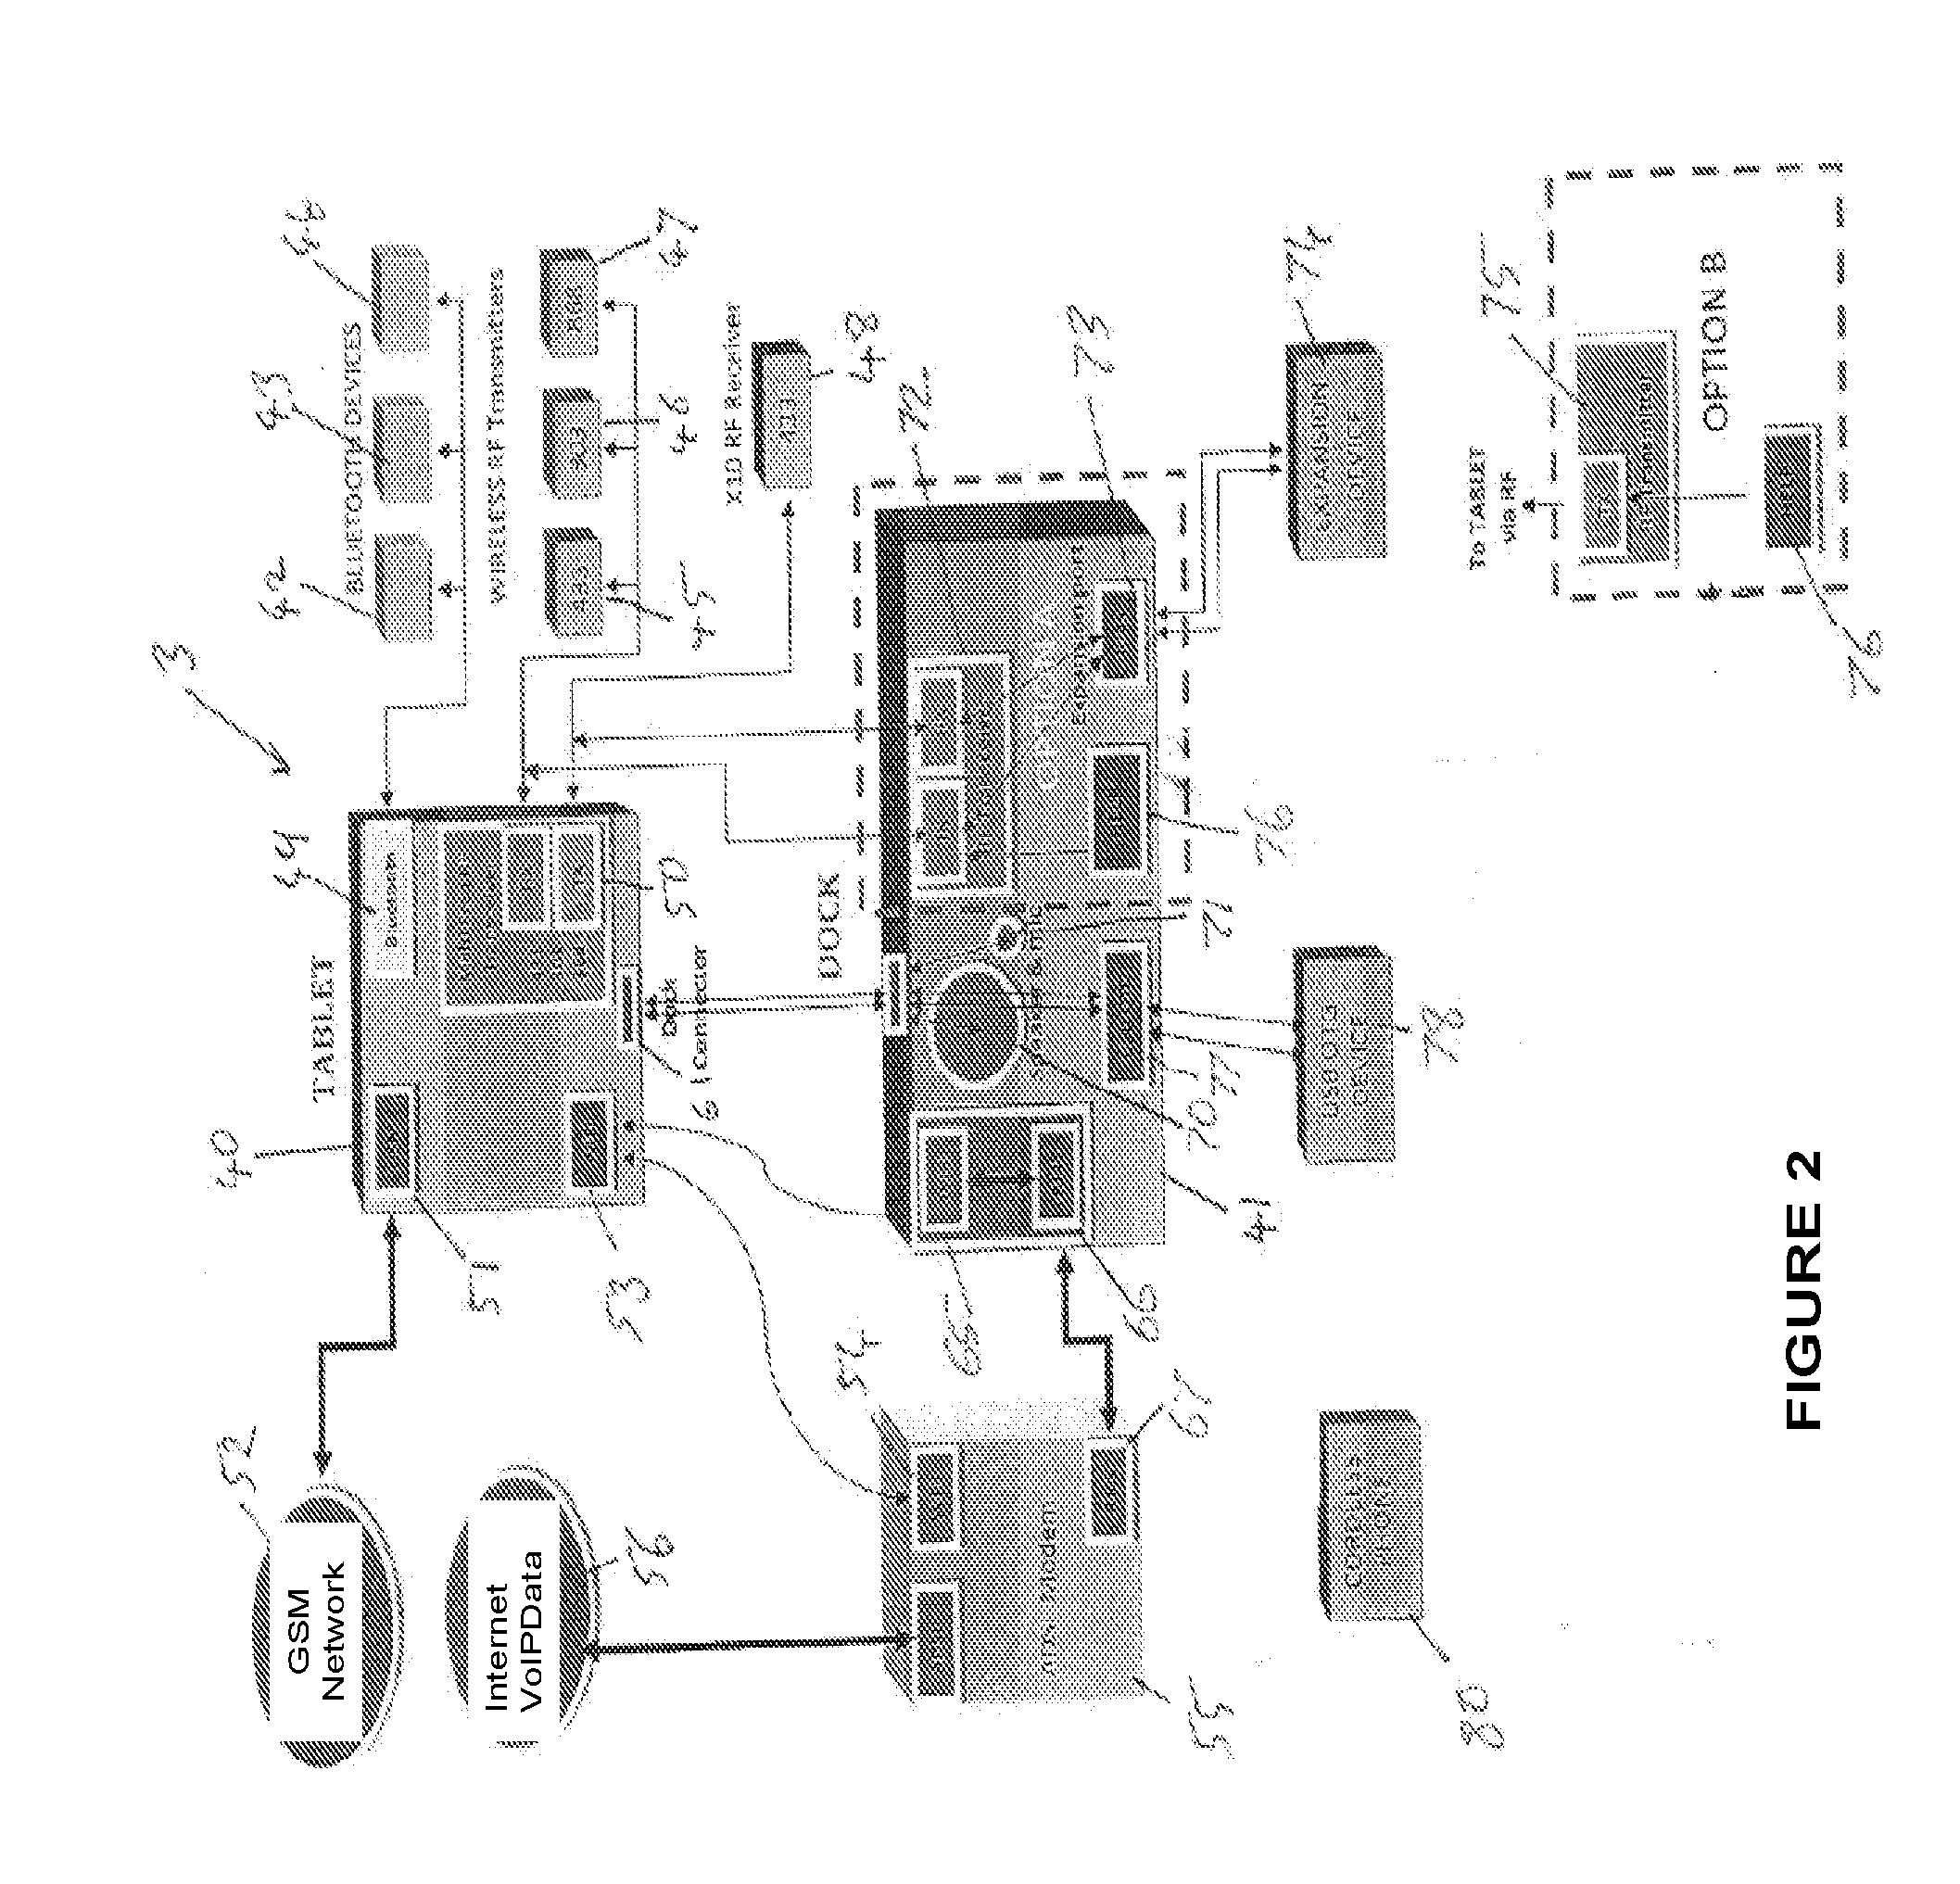 Method and Apparatus for Facilitating the Management of Health and Security